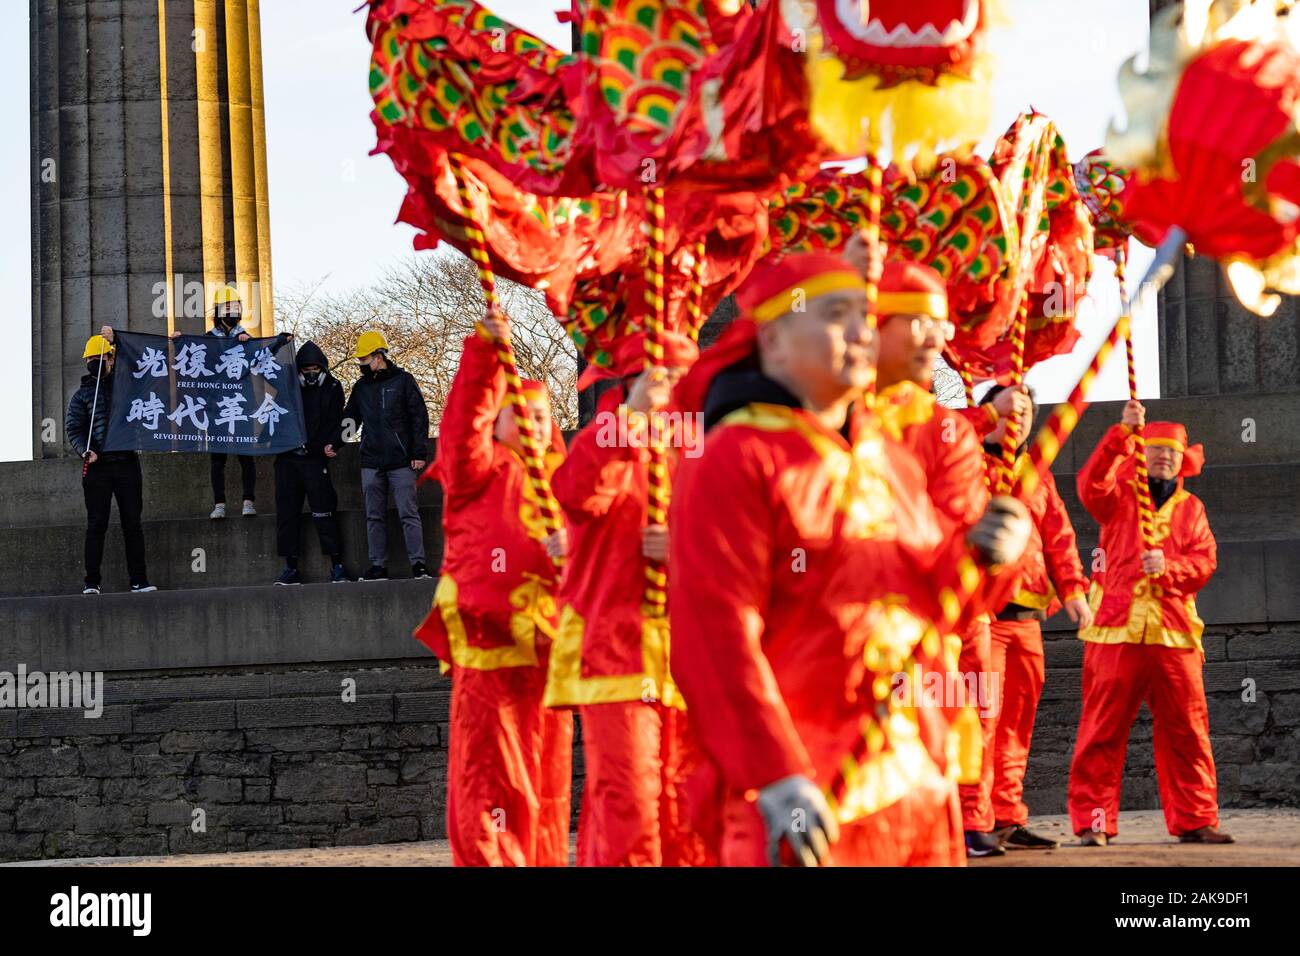 Edinburgh, Scotland, UK. 8th Jan 2020. Hong Kong pro democracy supporters stage demonstration during official Chinese New Year dragon dance event on Calton Hill in Edinburgh. The protest occurred during official photo call to mark start of Chinese New Year and the Year of the Rat. Iain Masterton/Alamy Live News Stock Photo